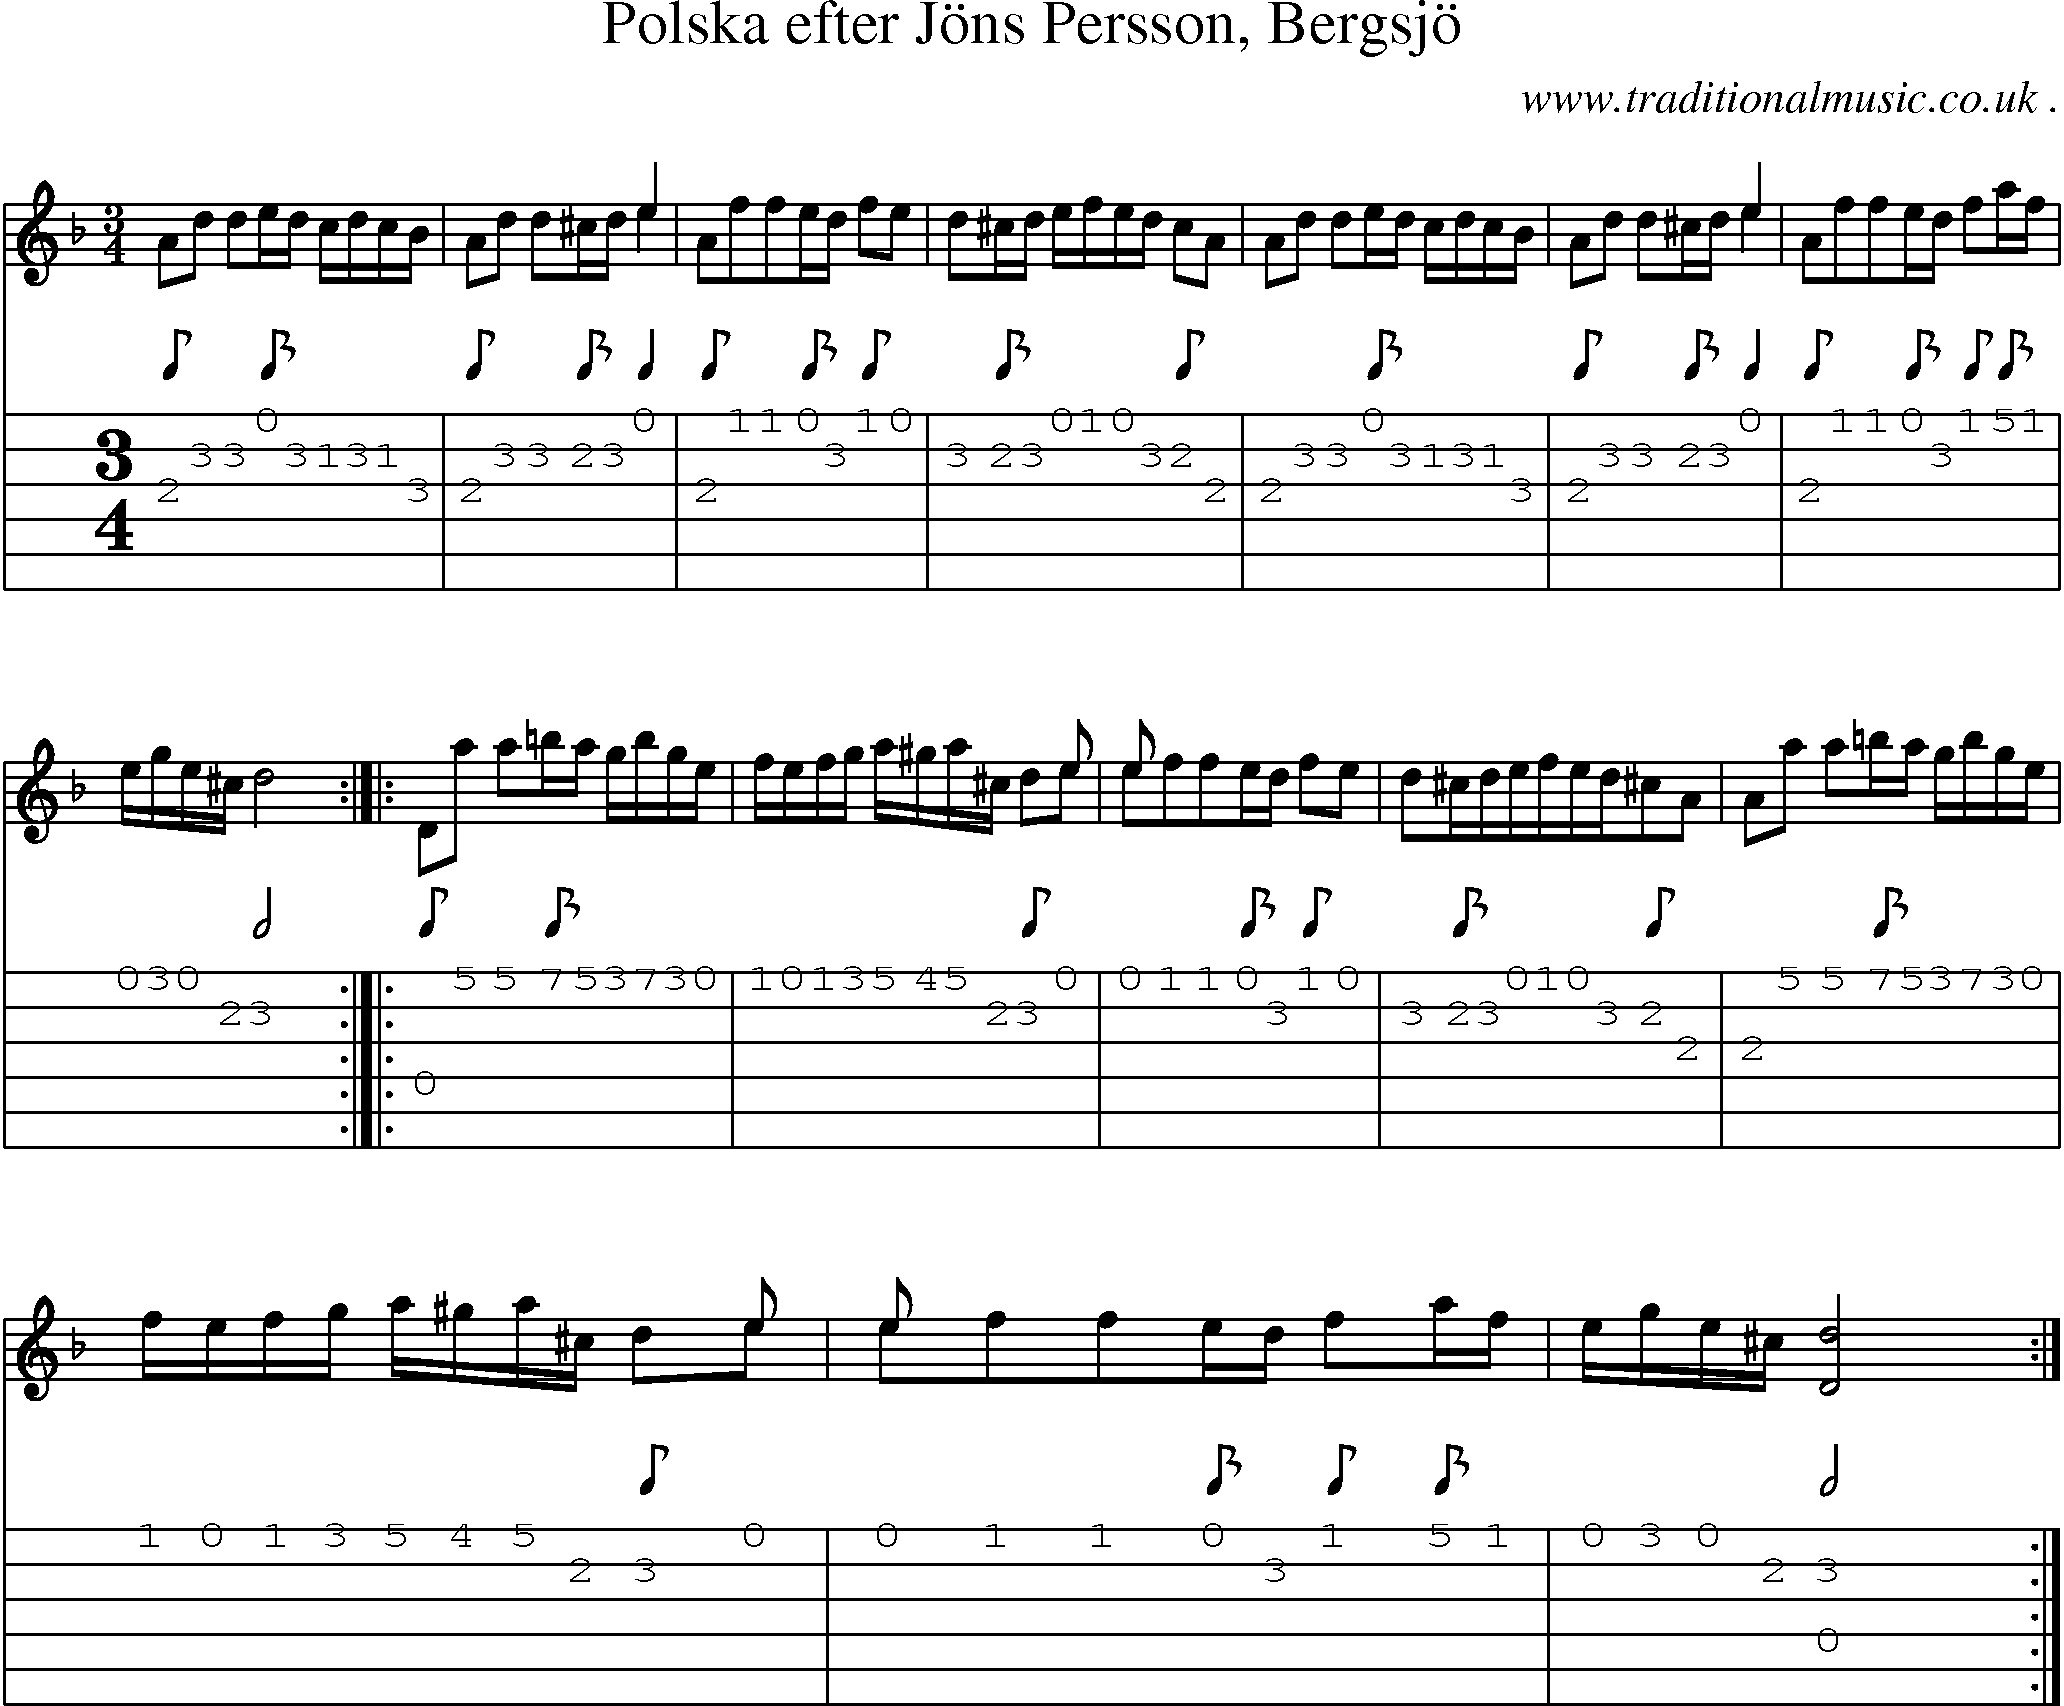 Sheet-Music and Guitar Tabs for Polska Efter Jons Persson Bergsjo